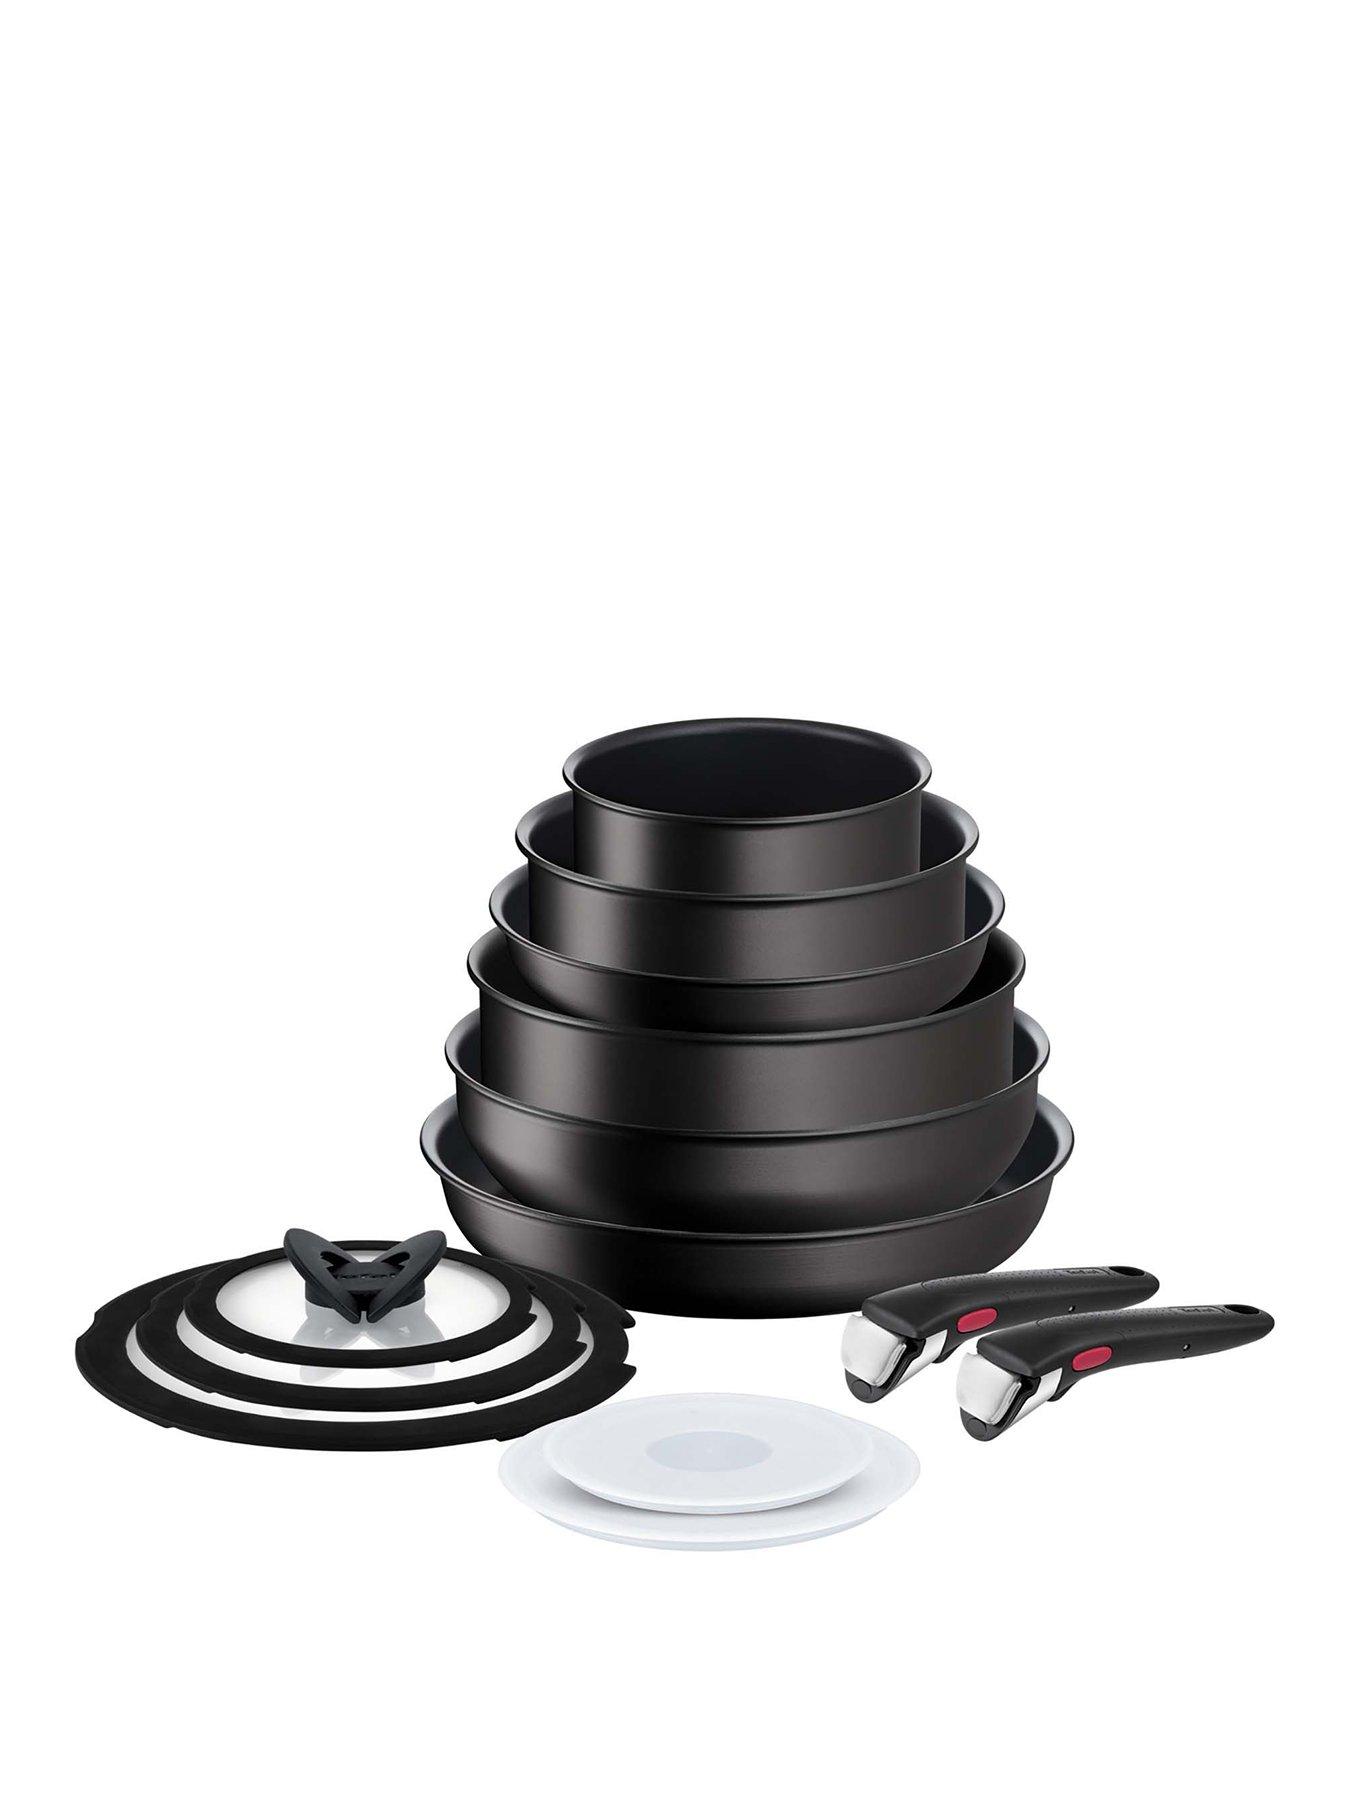 Tefal Ingenio Easy-On Pots and Pans Set with Removable Handles